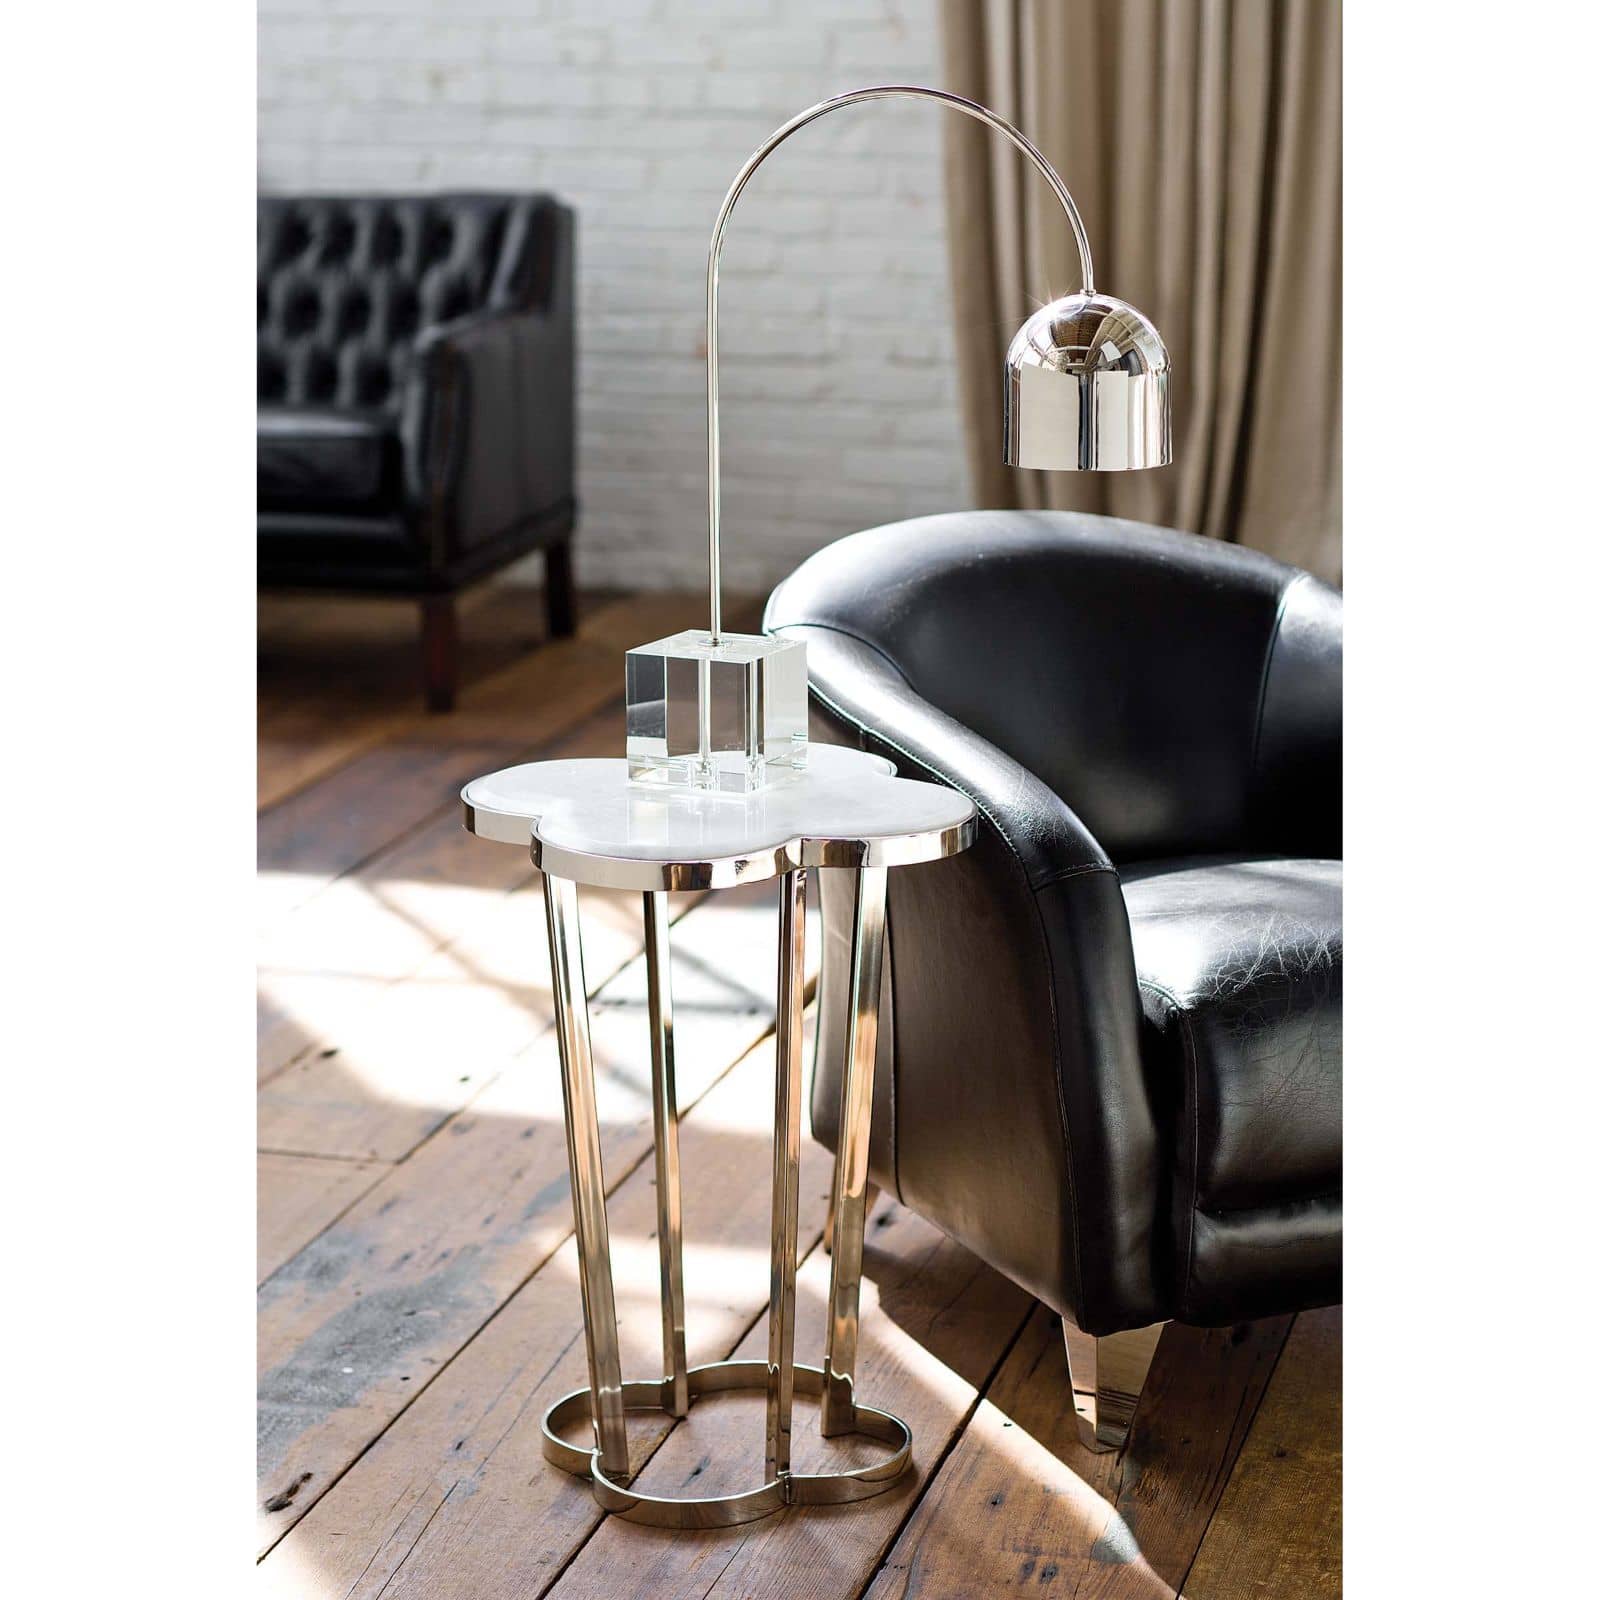 Regina Andrew Clover Table in Polished Nickel